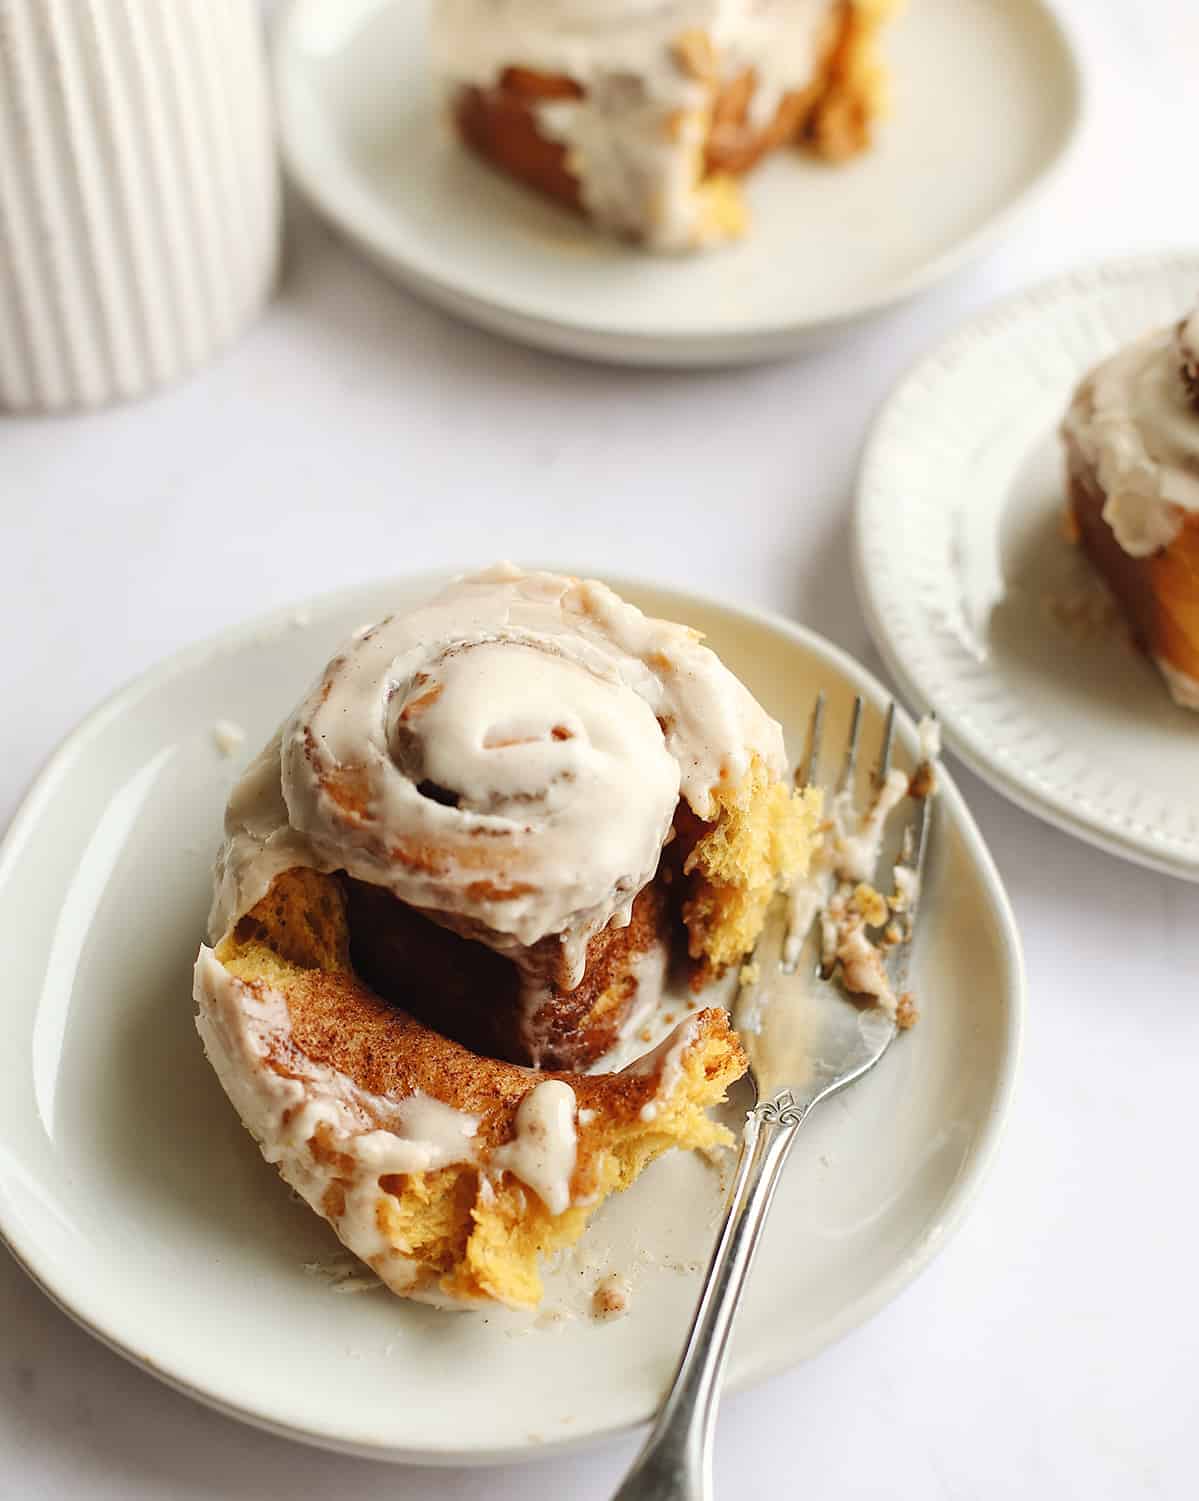 pumpkin cinnamon roll on a plate with a bite taken out of it and a fork next to it